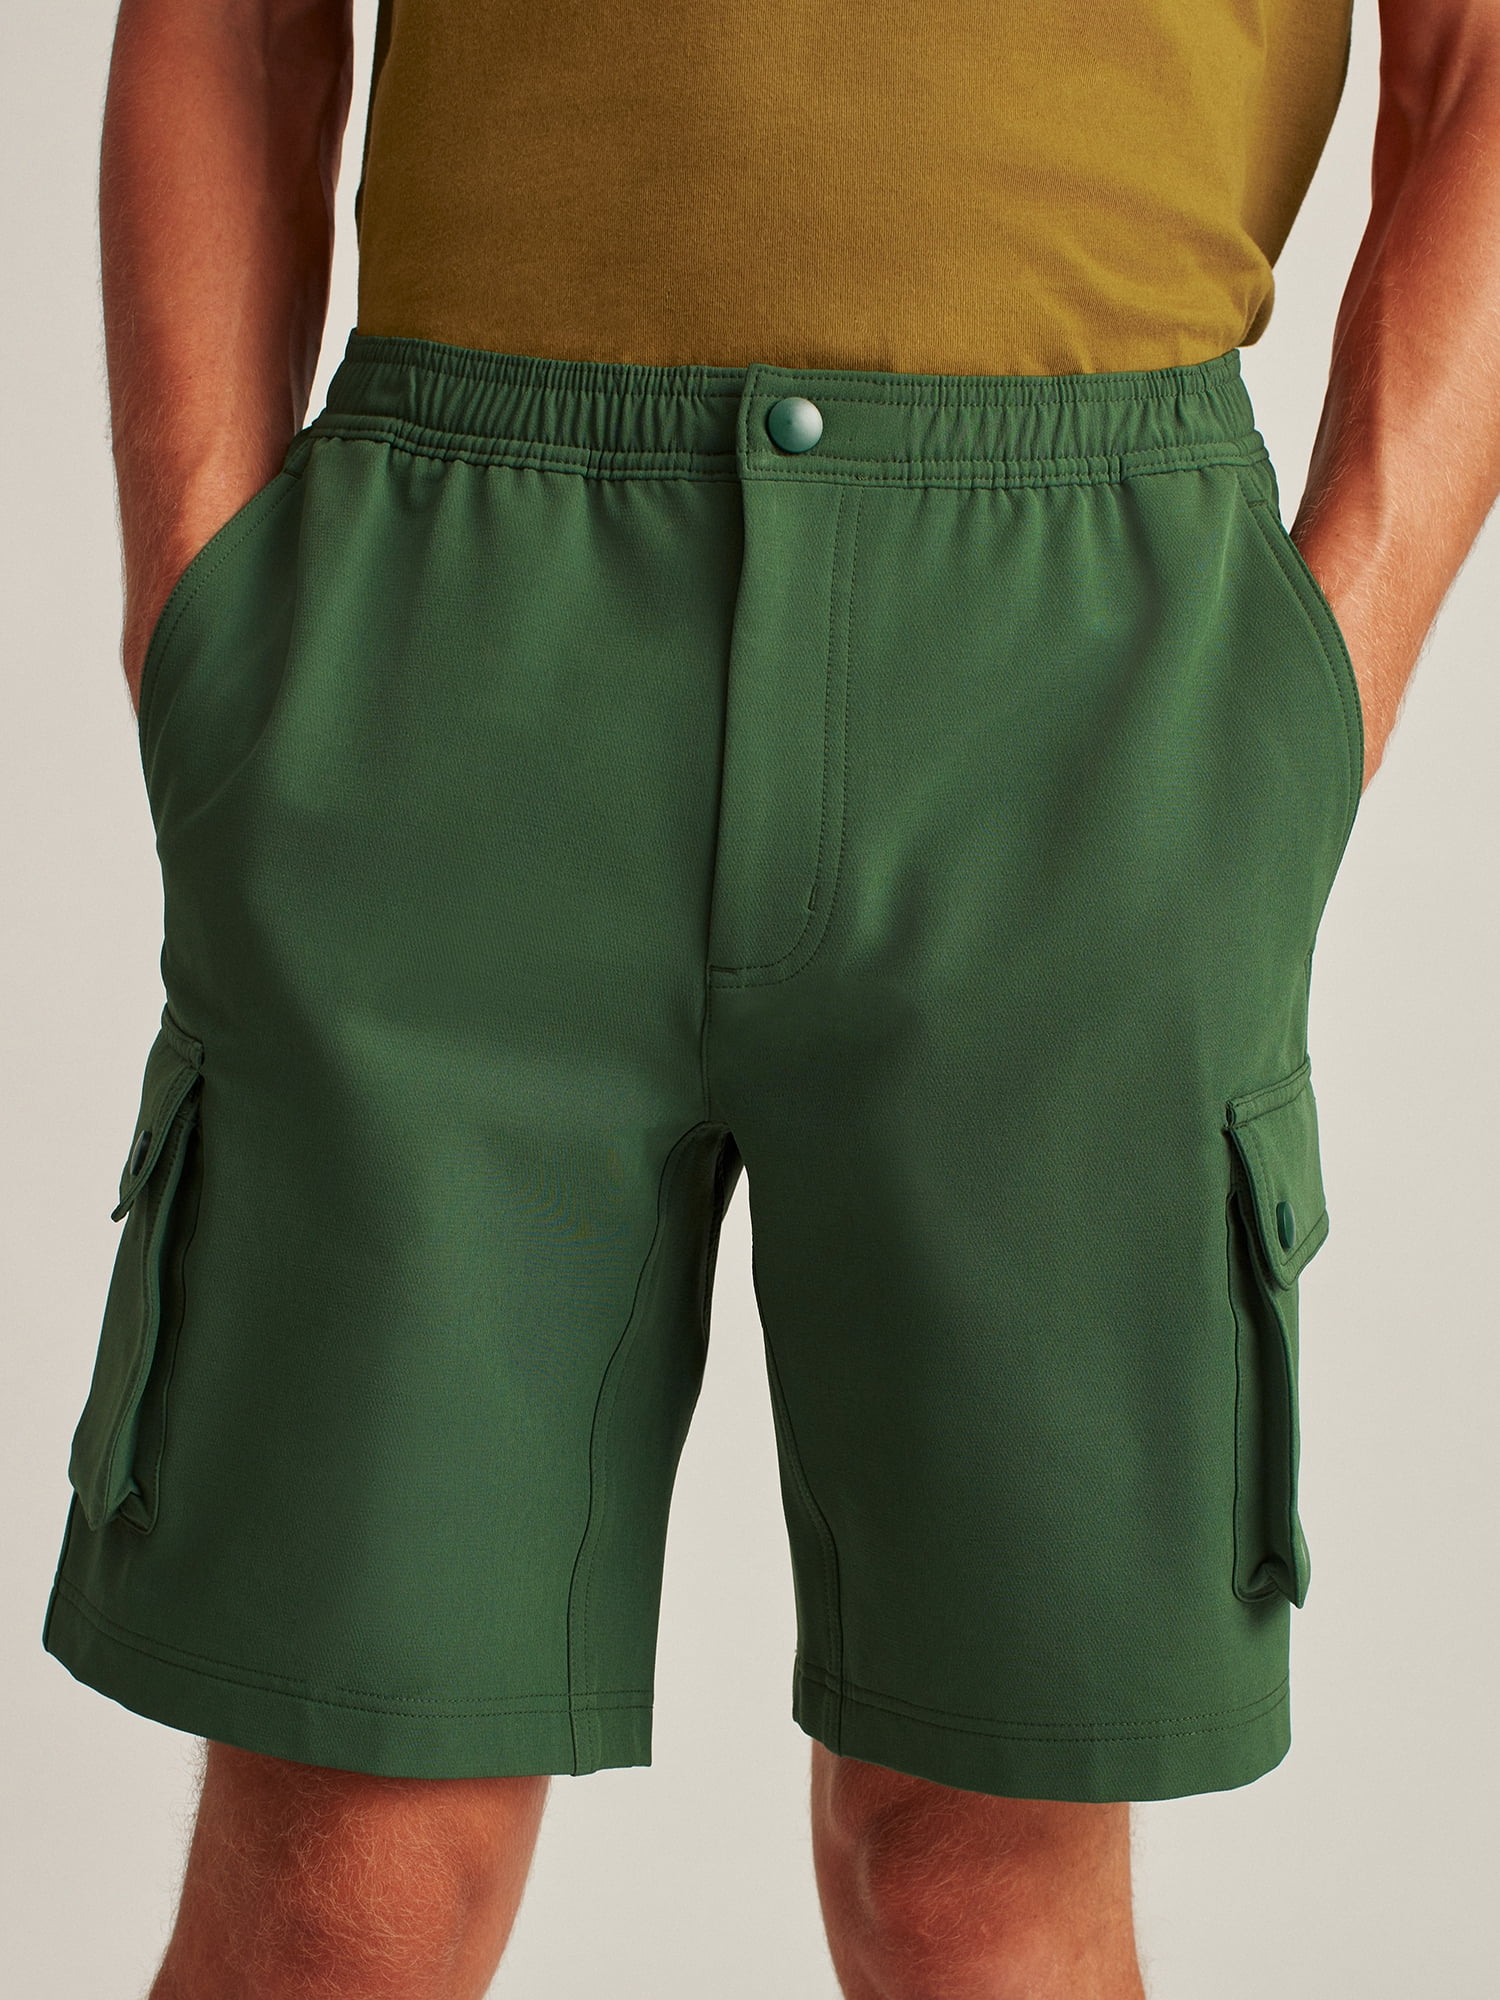 Fielder and Big Men's Utility Cargo Shorts, Up to Size 3XL - Walmart.com